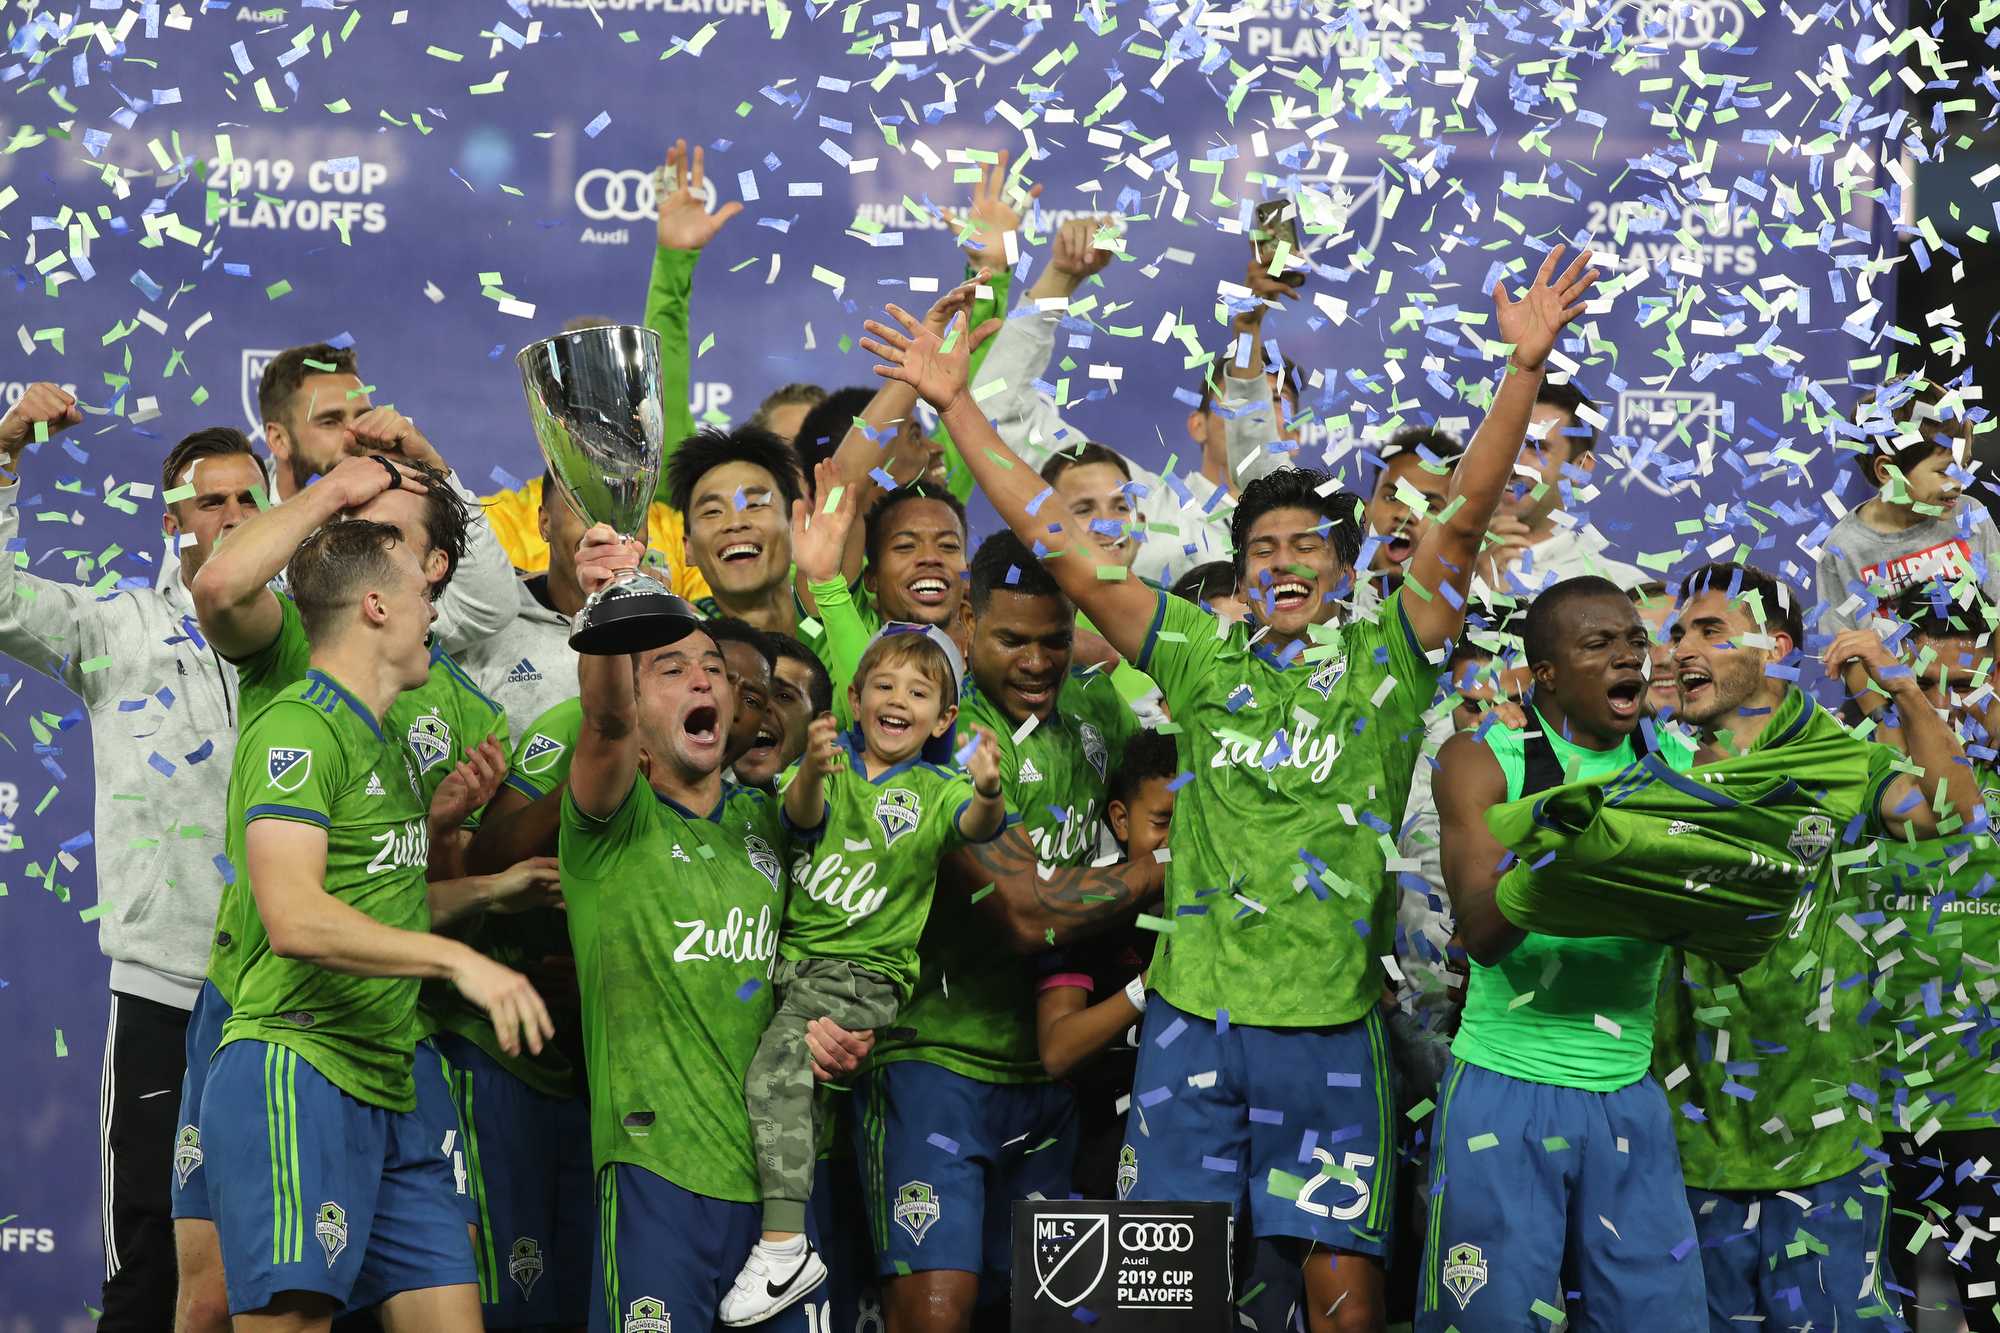 LOS ANGELES, CALIF. -- TUESDAY, OCTOBER 29, 2019: Seattle Sounders Football Club midfielder hoists the trophy as the team celebrate their 3-1 playoff win over Los Angeles Football Club at Banc of California in Los Angeles, Calif., on Oct. 29, 2019. (Allen J. Schaben / Los Angeles Times)